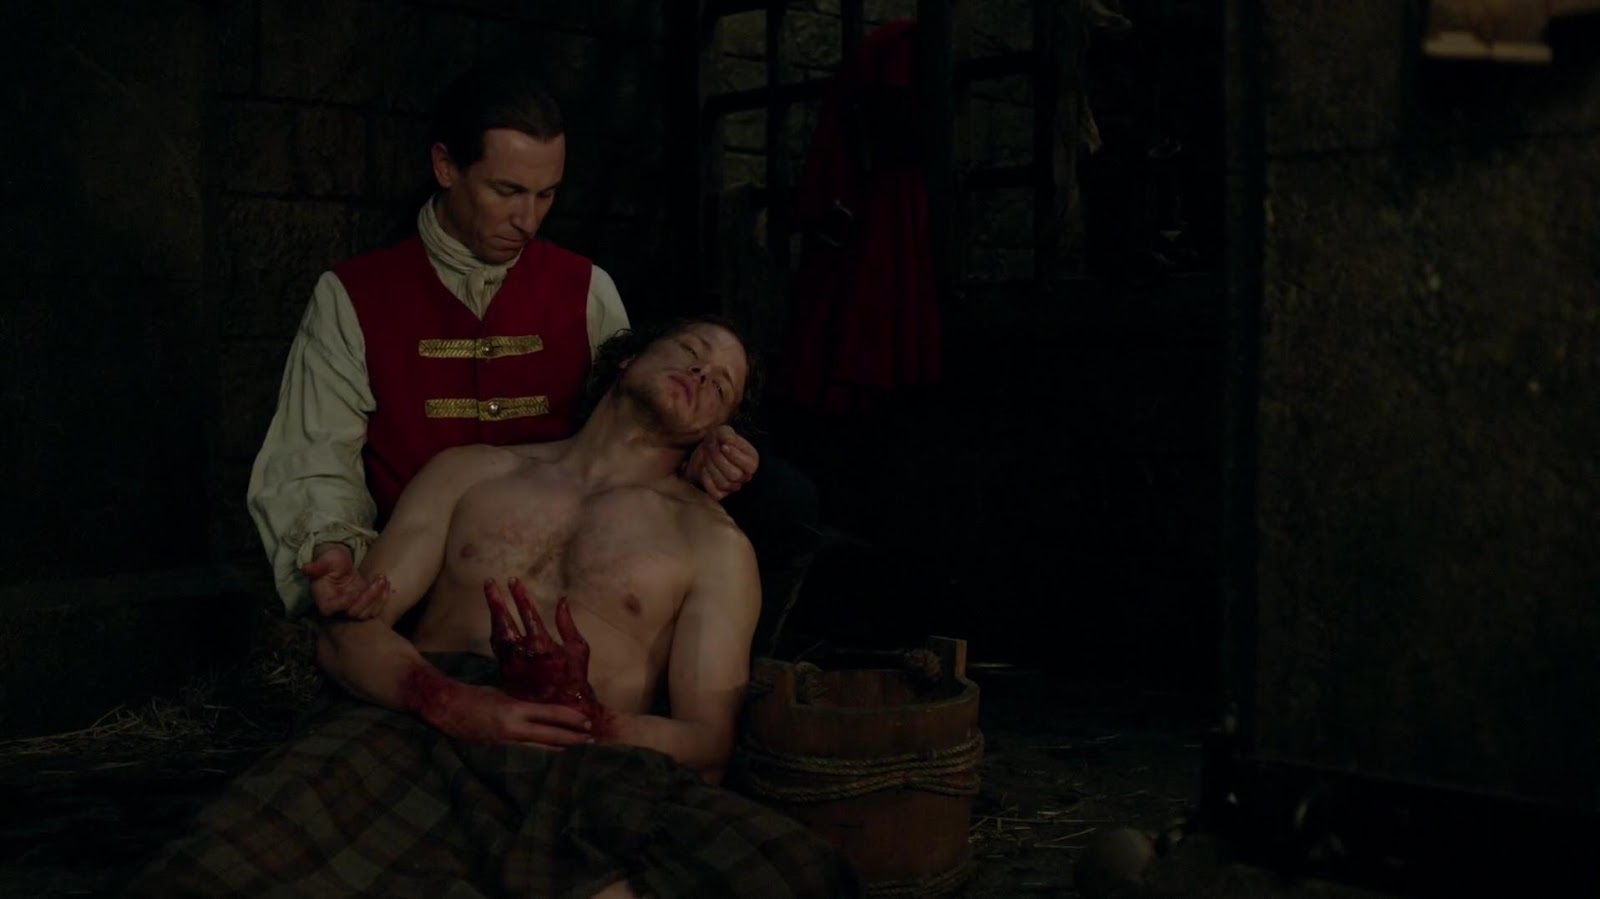 Restituda S World Of Male Nudity Tobias Menzies And Sam Heughan In